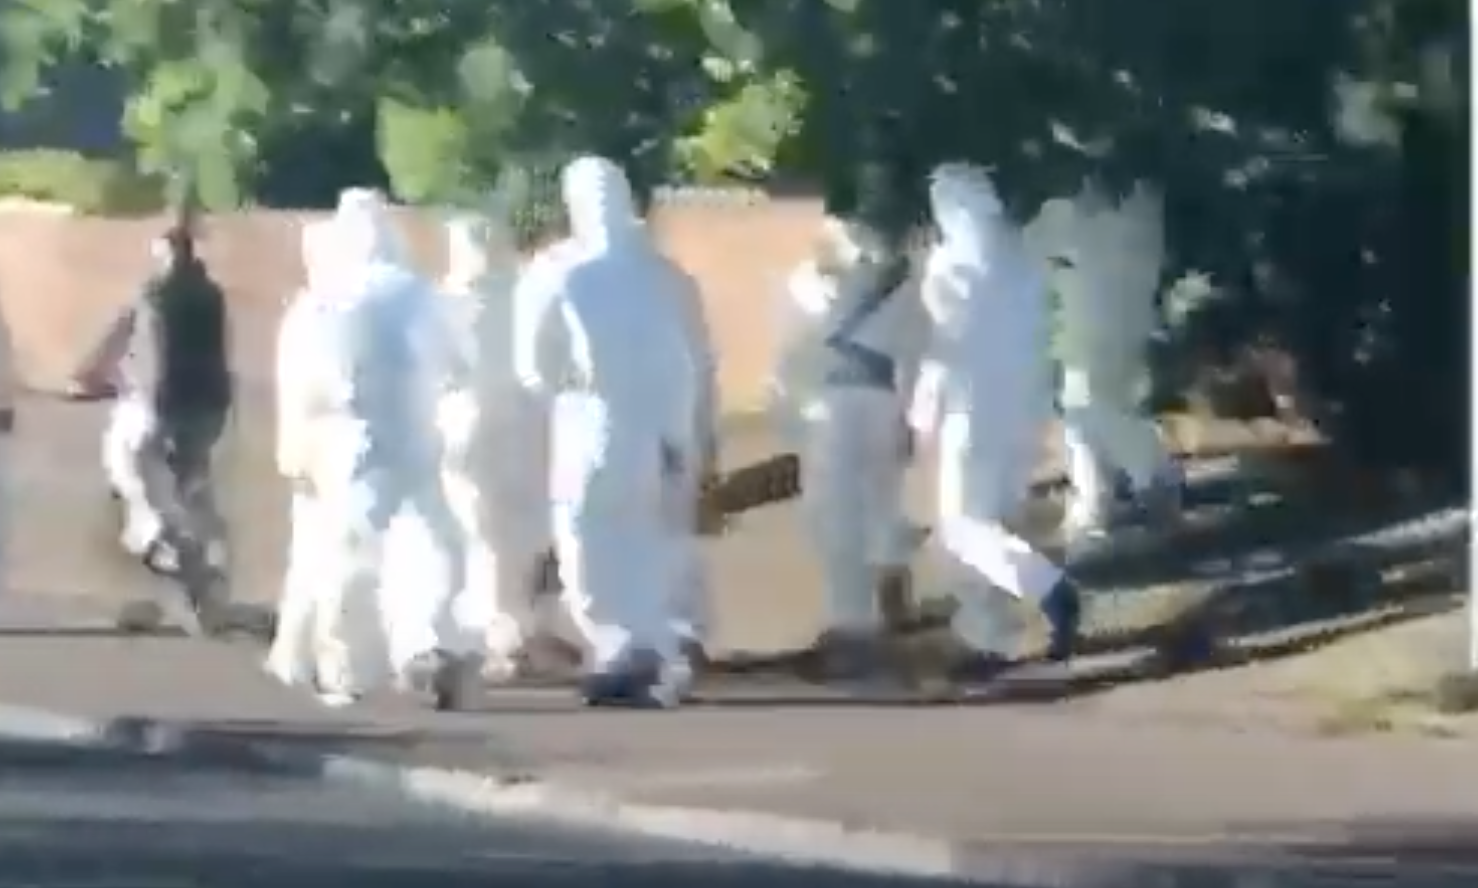 INCIDENT: Police looking for information about this group of men in white boiler suits.